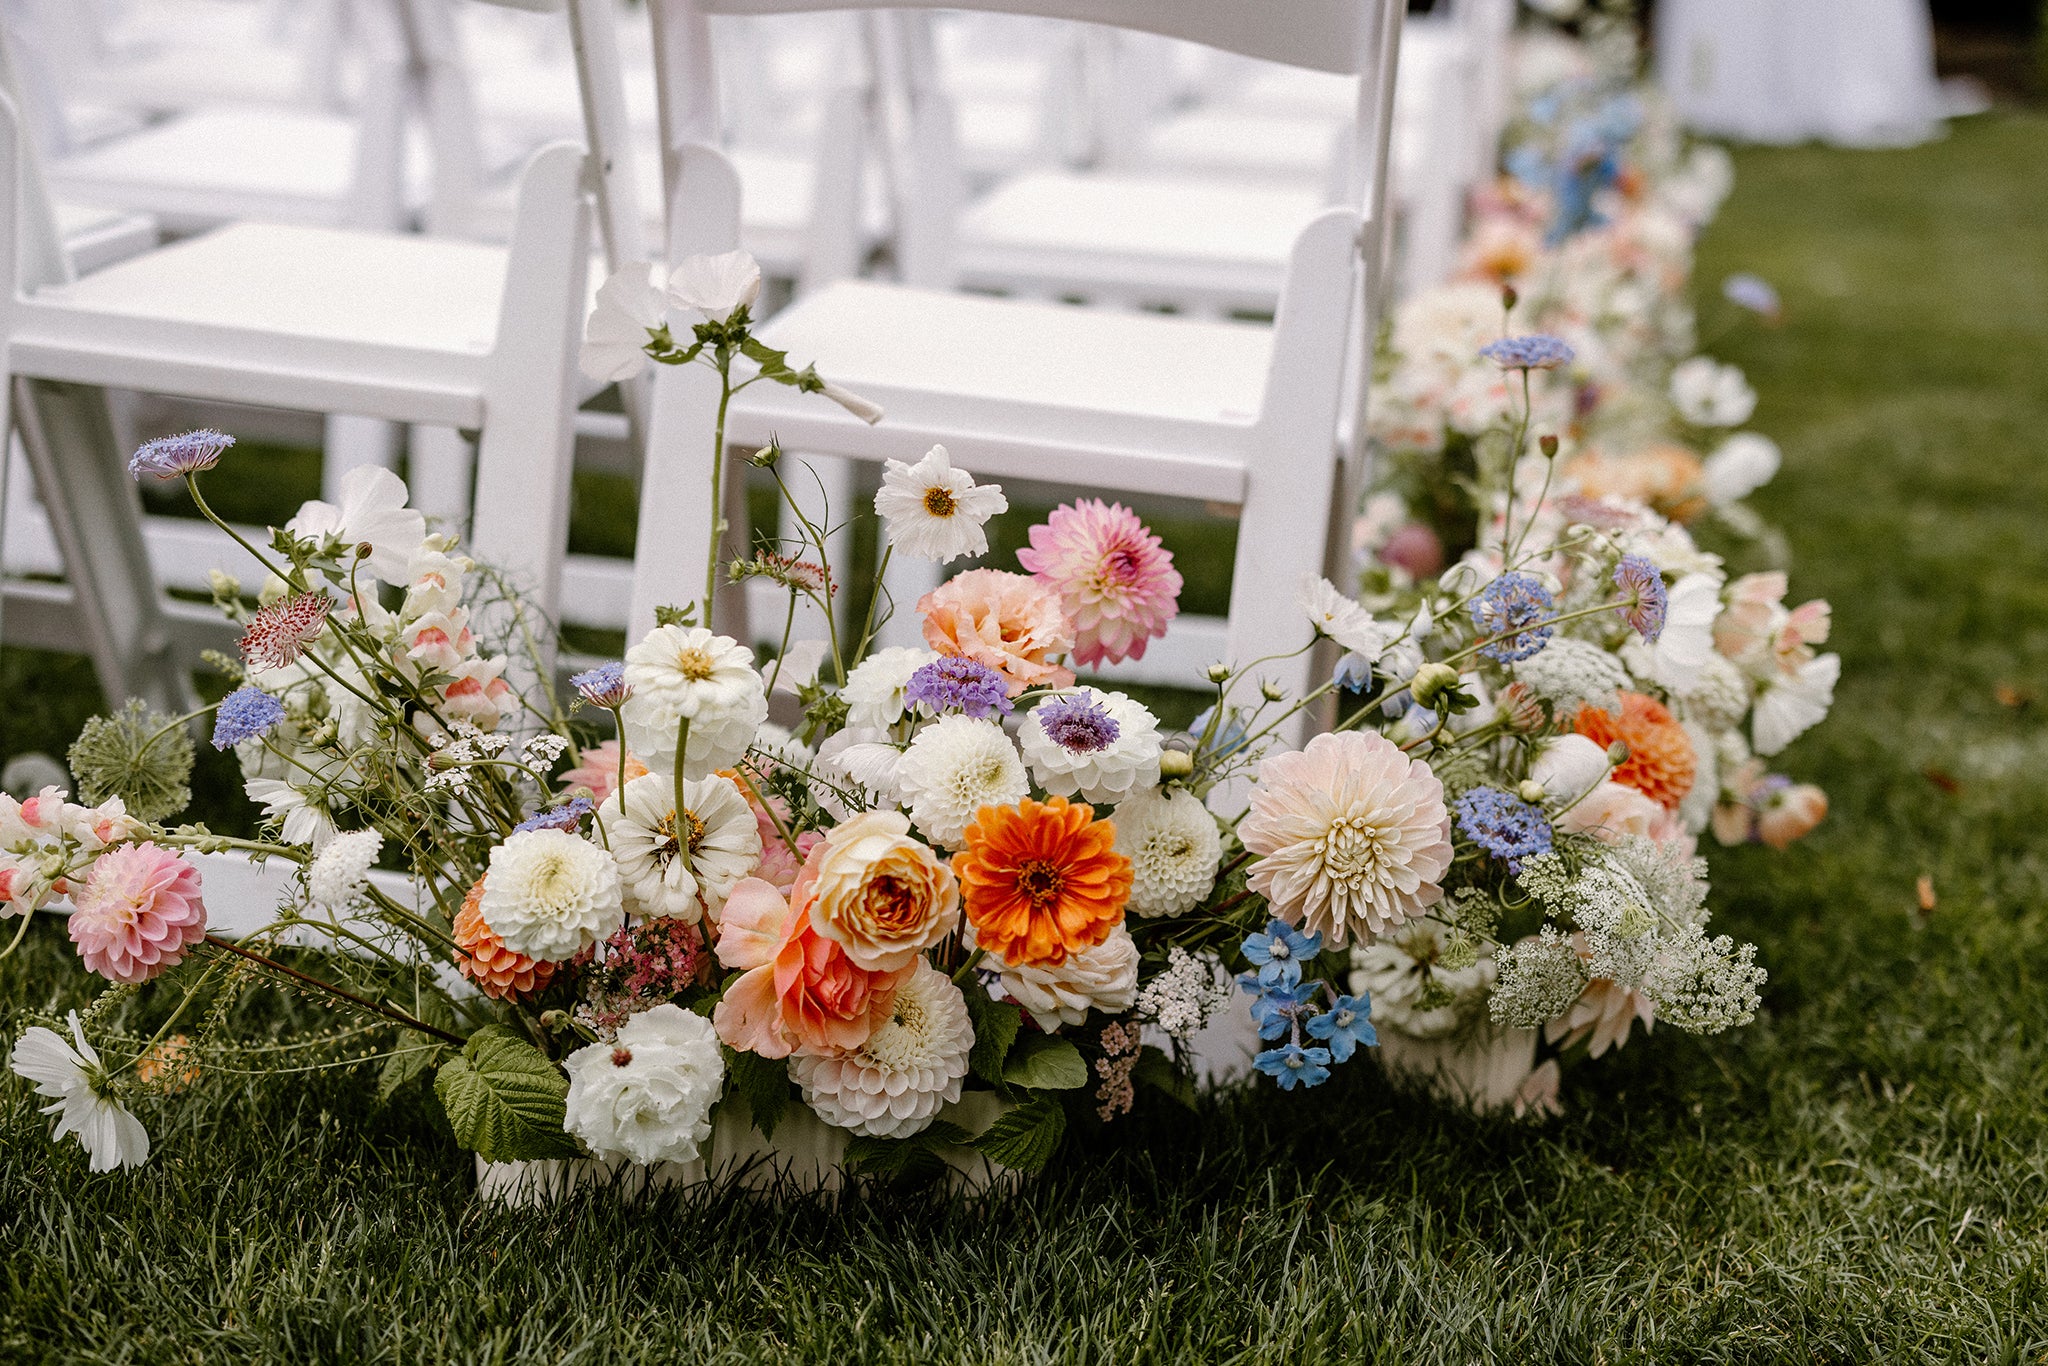 Movable aisle runner florals along the ground in English garden wedding.